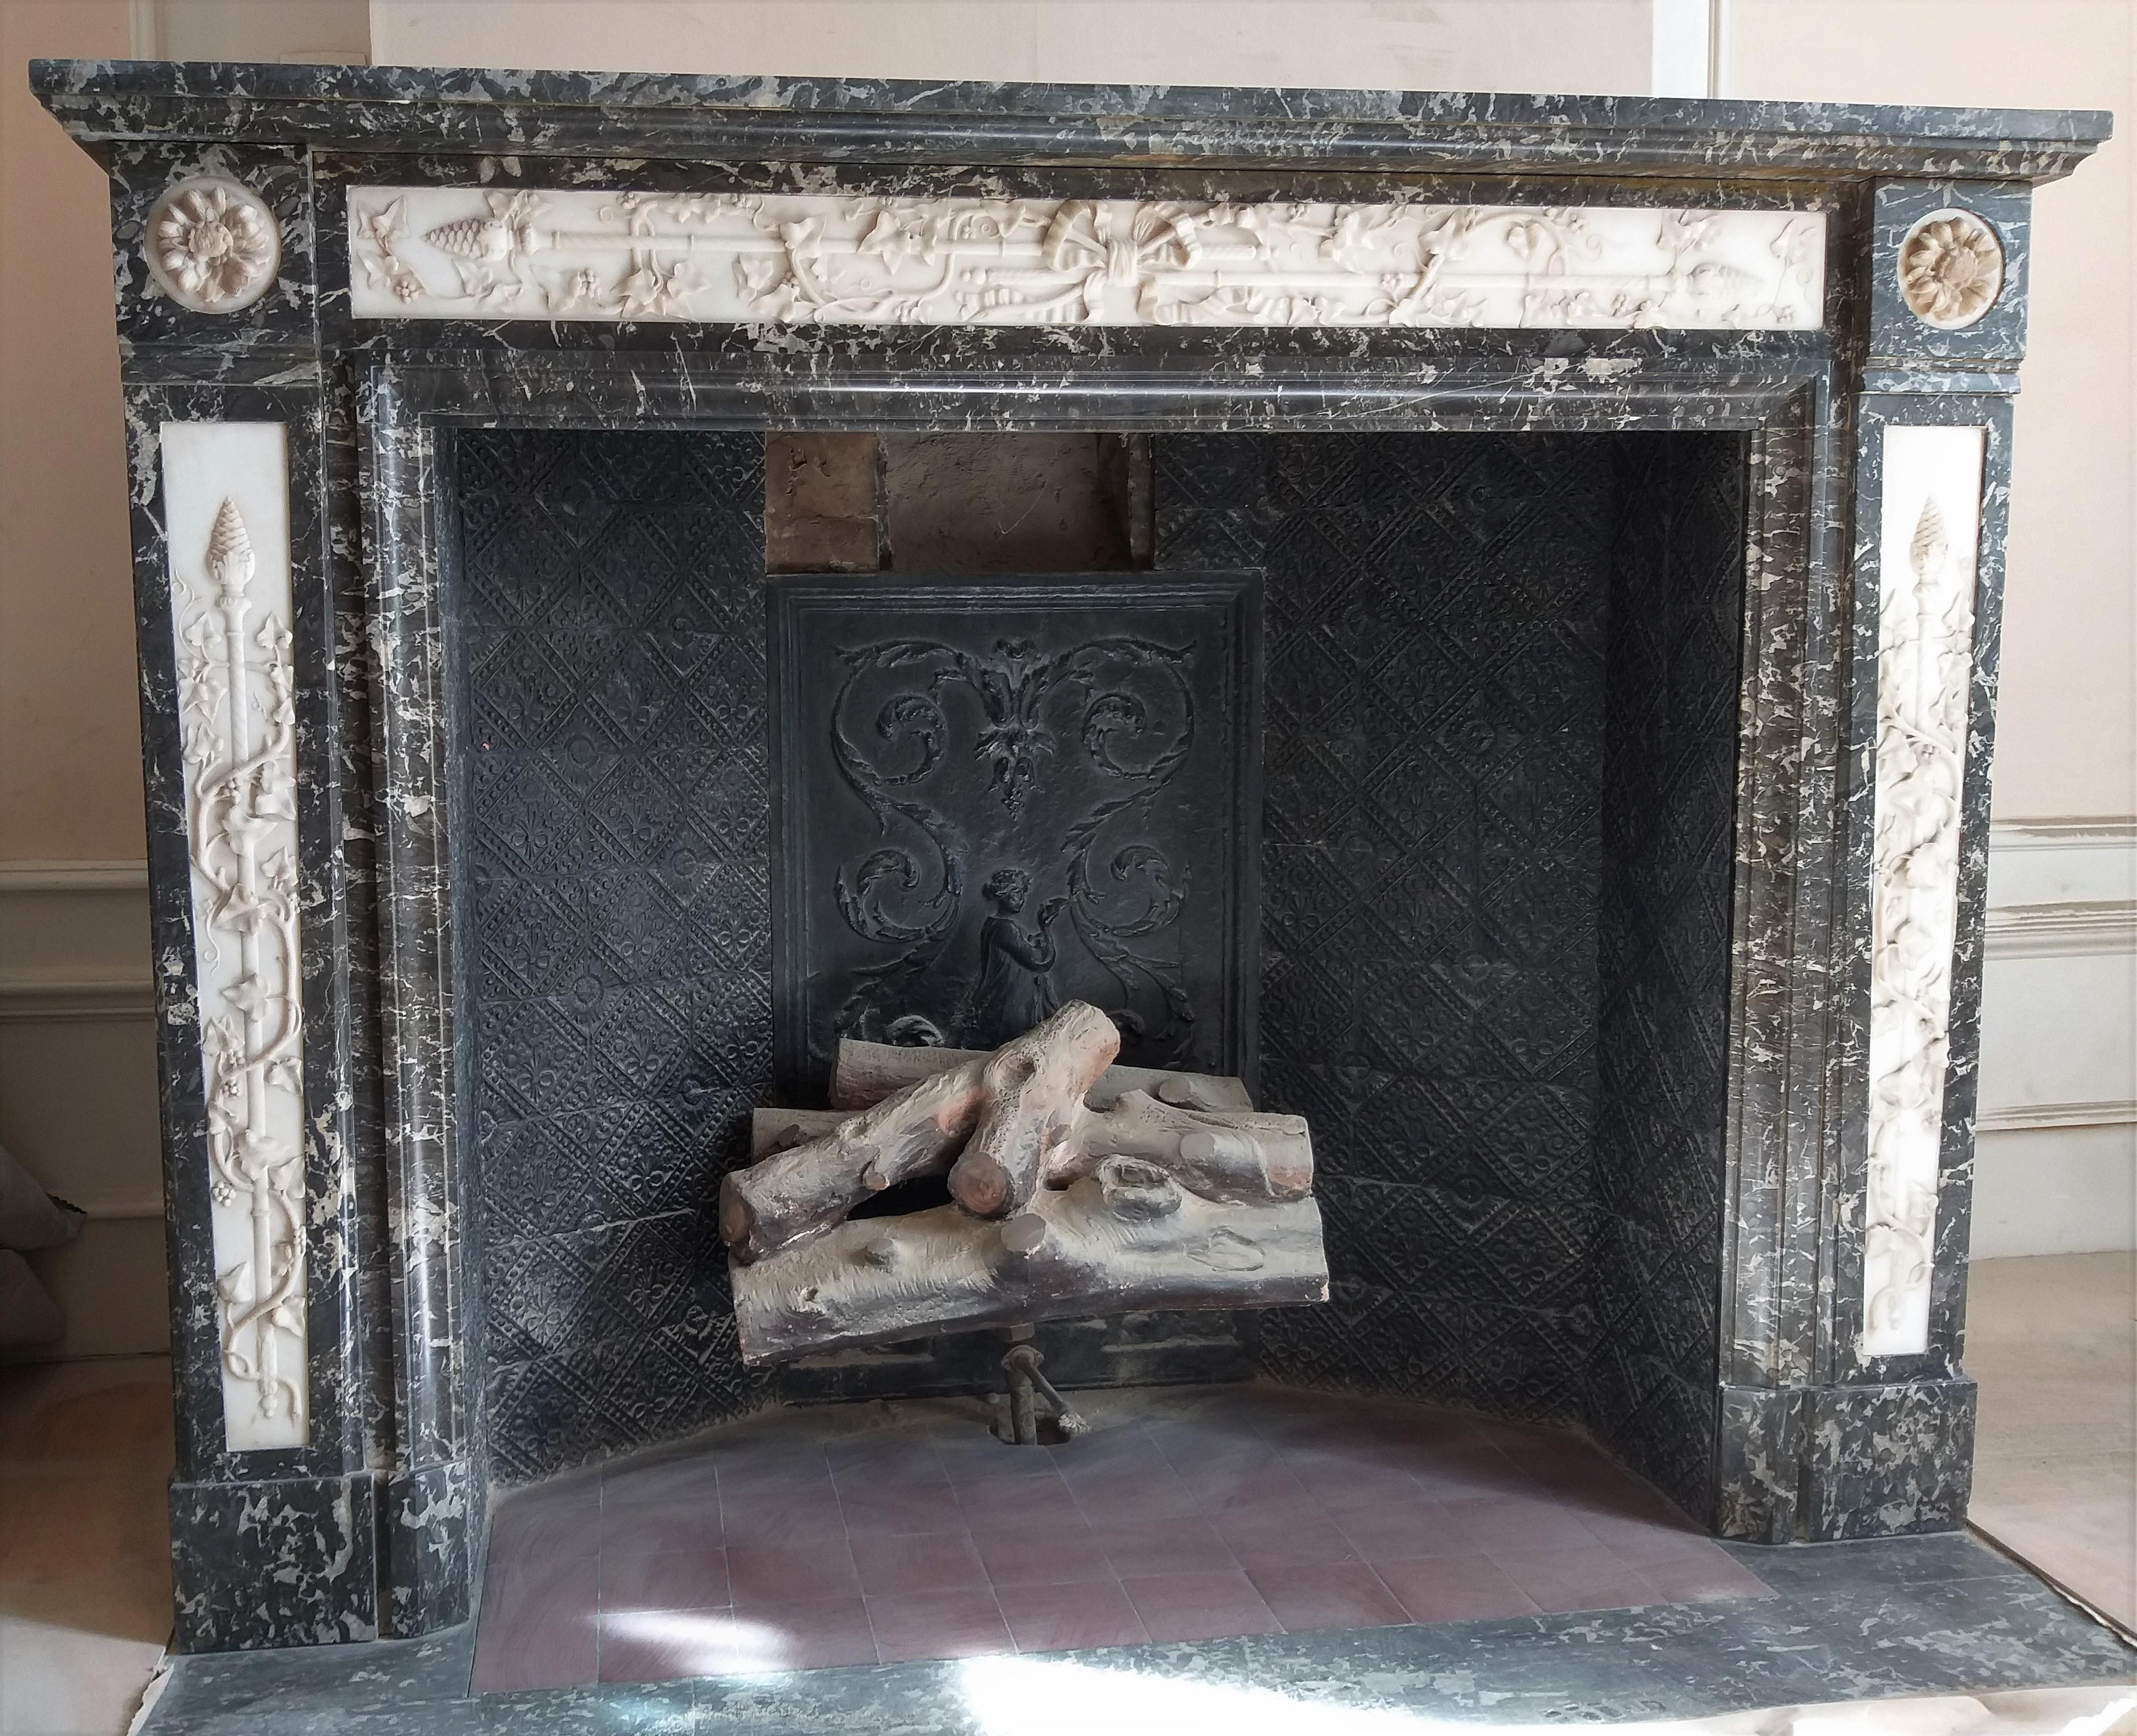 A very beautiful Saint Anna marble fireplace surround in the Louis XVI style, with inlays of Carrara marble.
Finely carved foliate Ivy vines, all common to the period, late 19th century.
This elegant fireplace stood from 1881 till 2020 in a Brussels